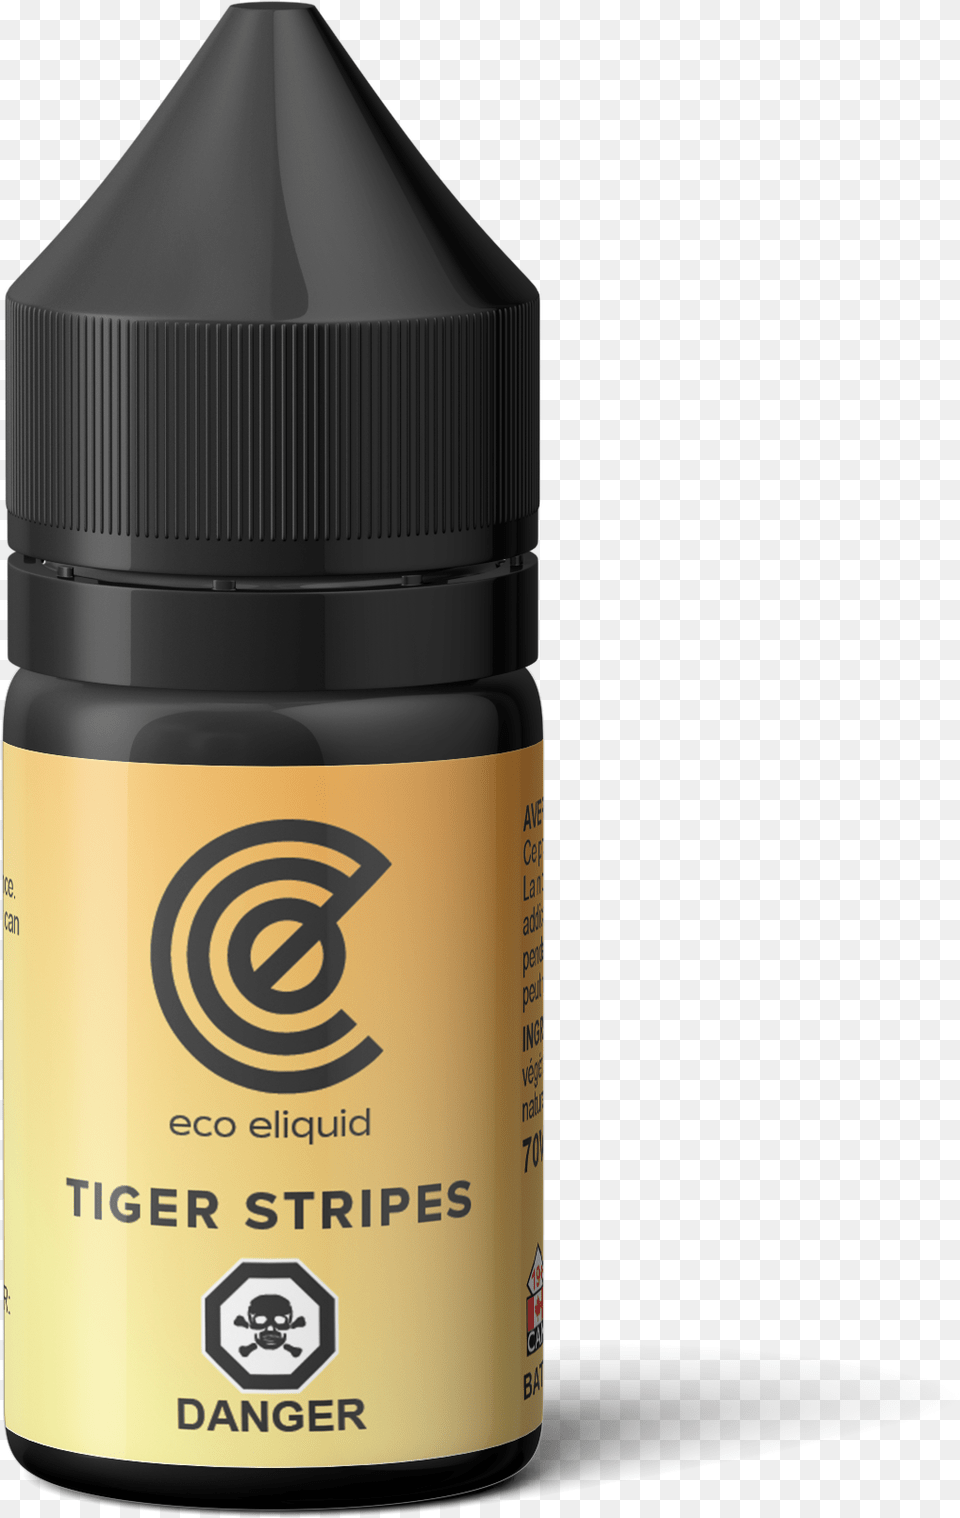 Eco Liquid Tiger Stripes 30ml Cosmetics, Bottle, Perfume, Can, Spray Can Png Image